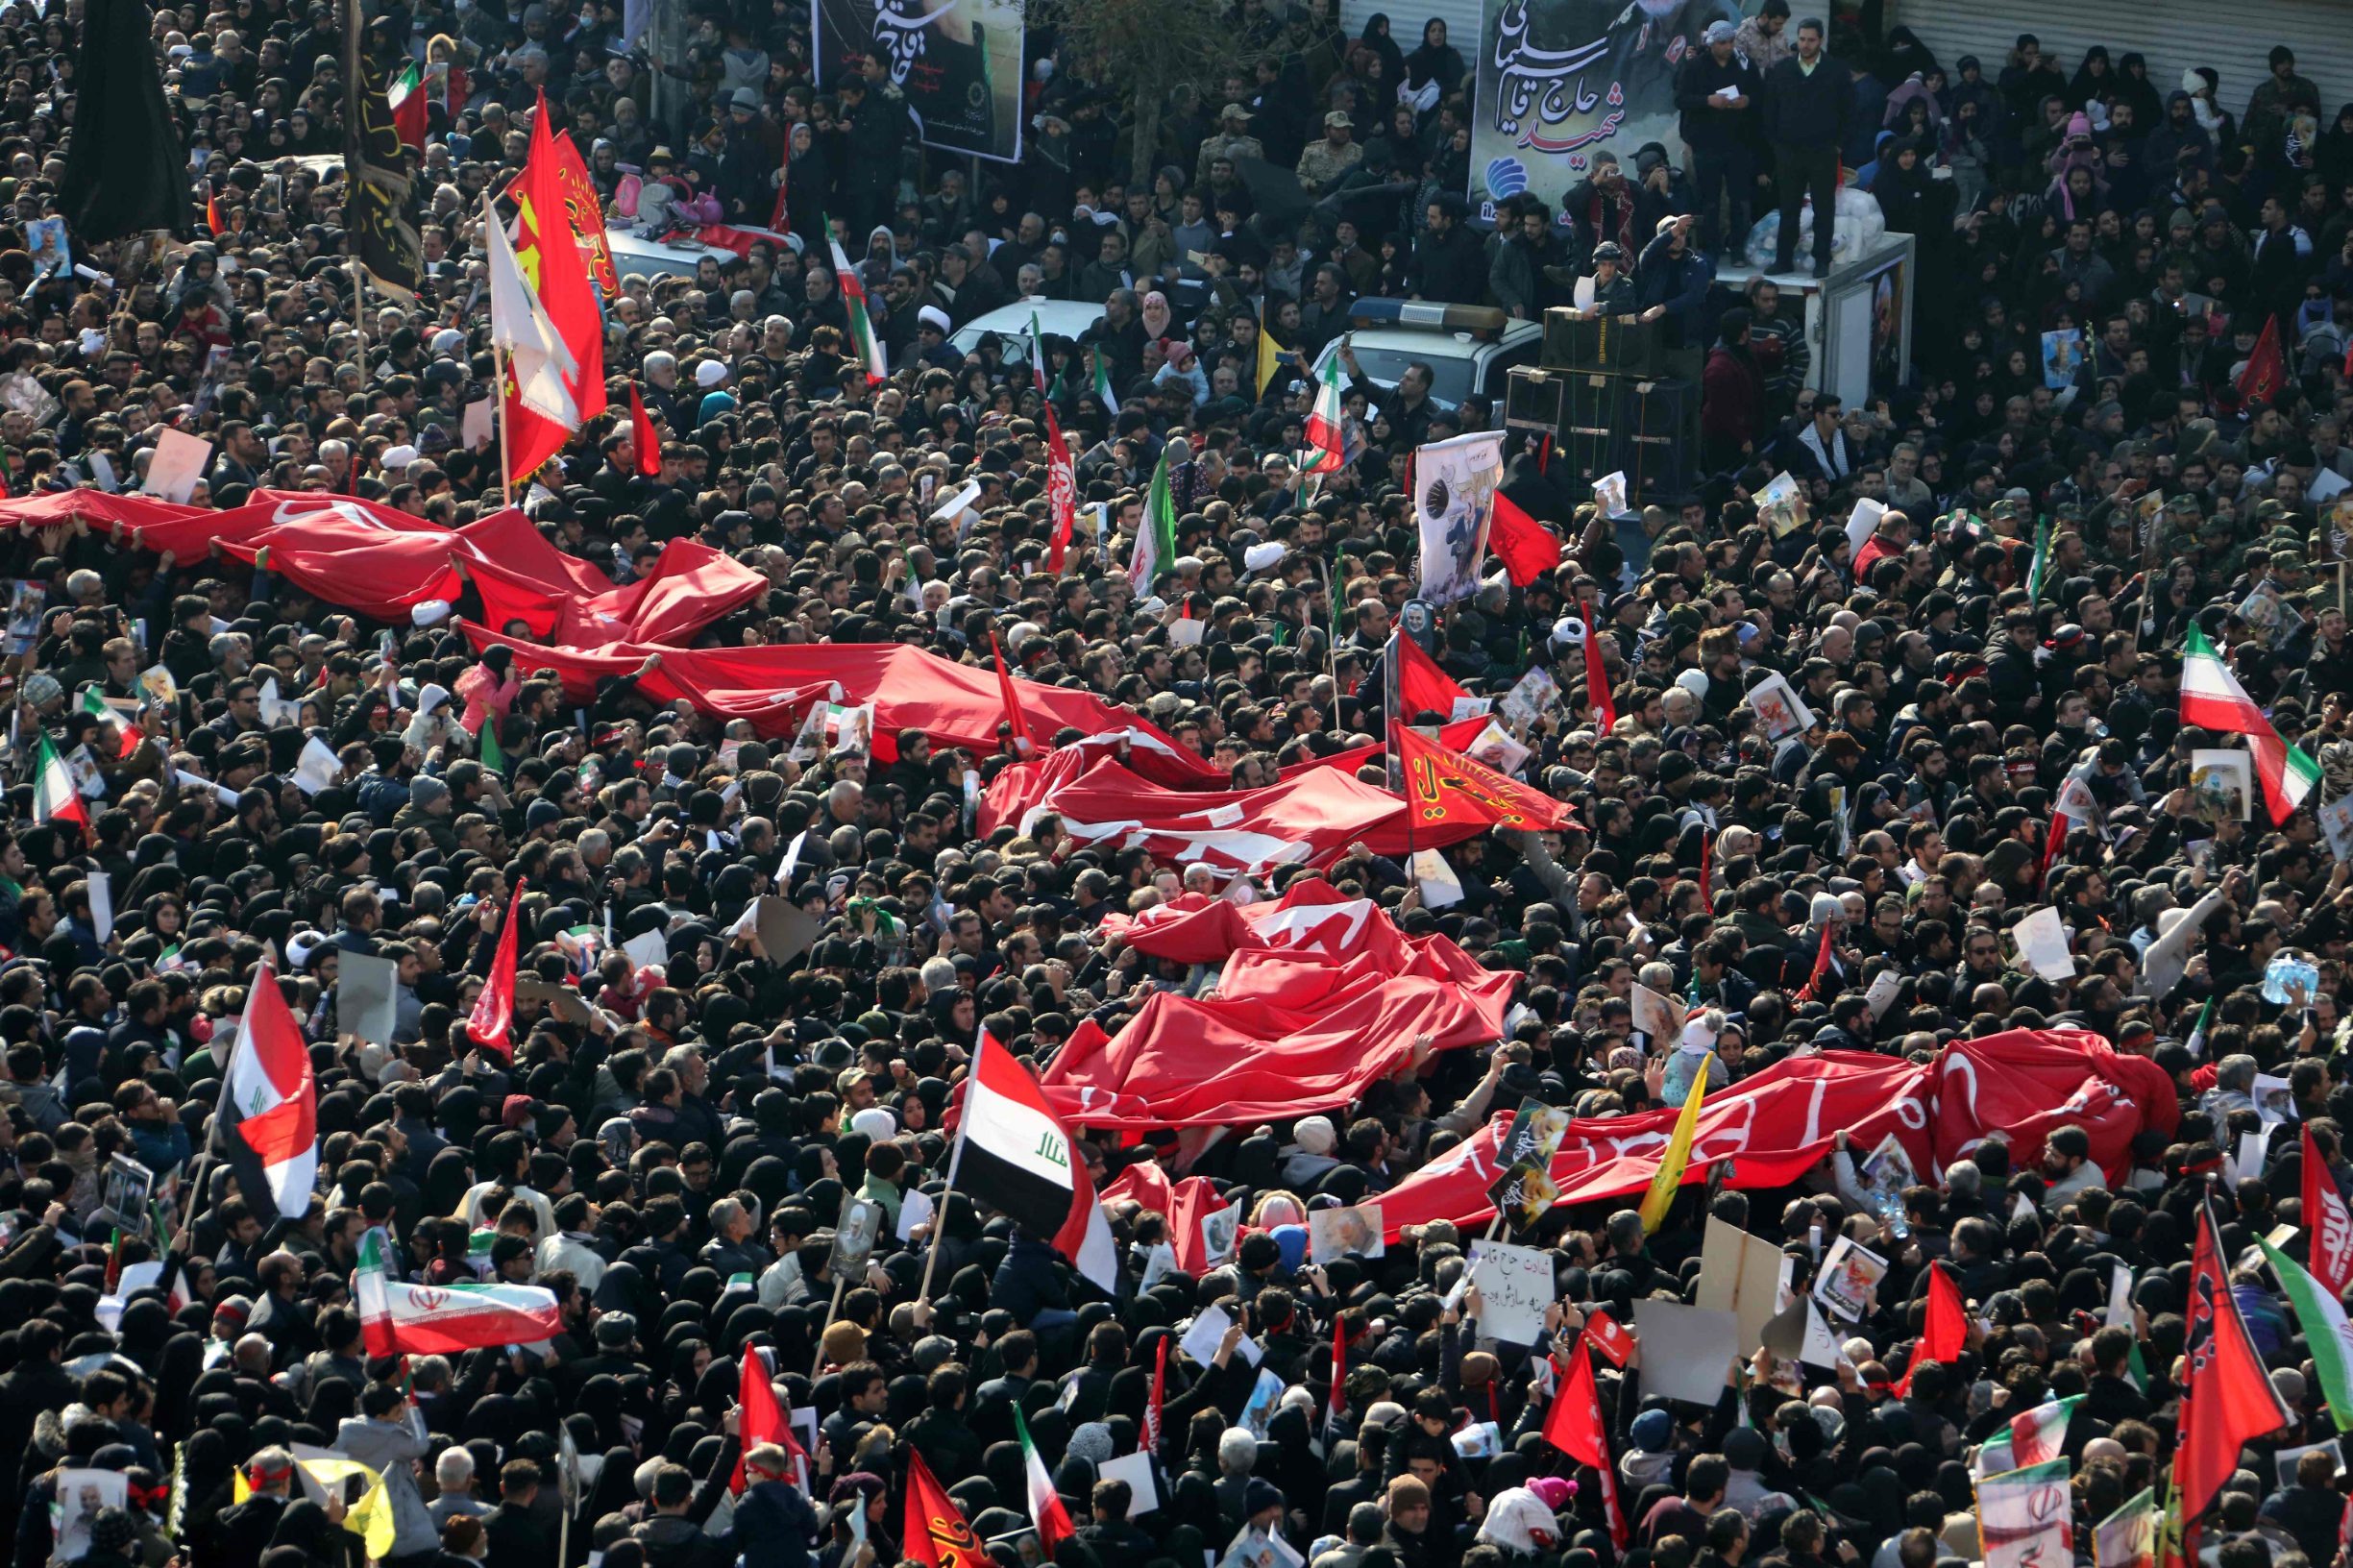 Iranian mourners take part in a funeral procession in the capital Tehran on January 6, 2020, for slain military commander Qasem Soleimani, Iraqi paramilitary chief Abu Mahdi al-Muhandis, and other victims of a US attack. - Downtown Tehran was brought to a standstill as mourners flooded the Iranian capital to pay an emotional homage to Soleimani, the 